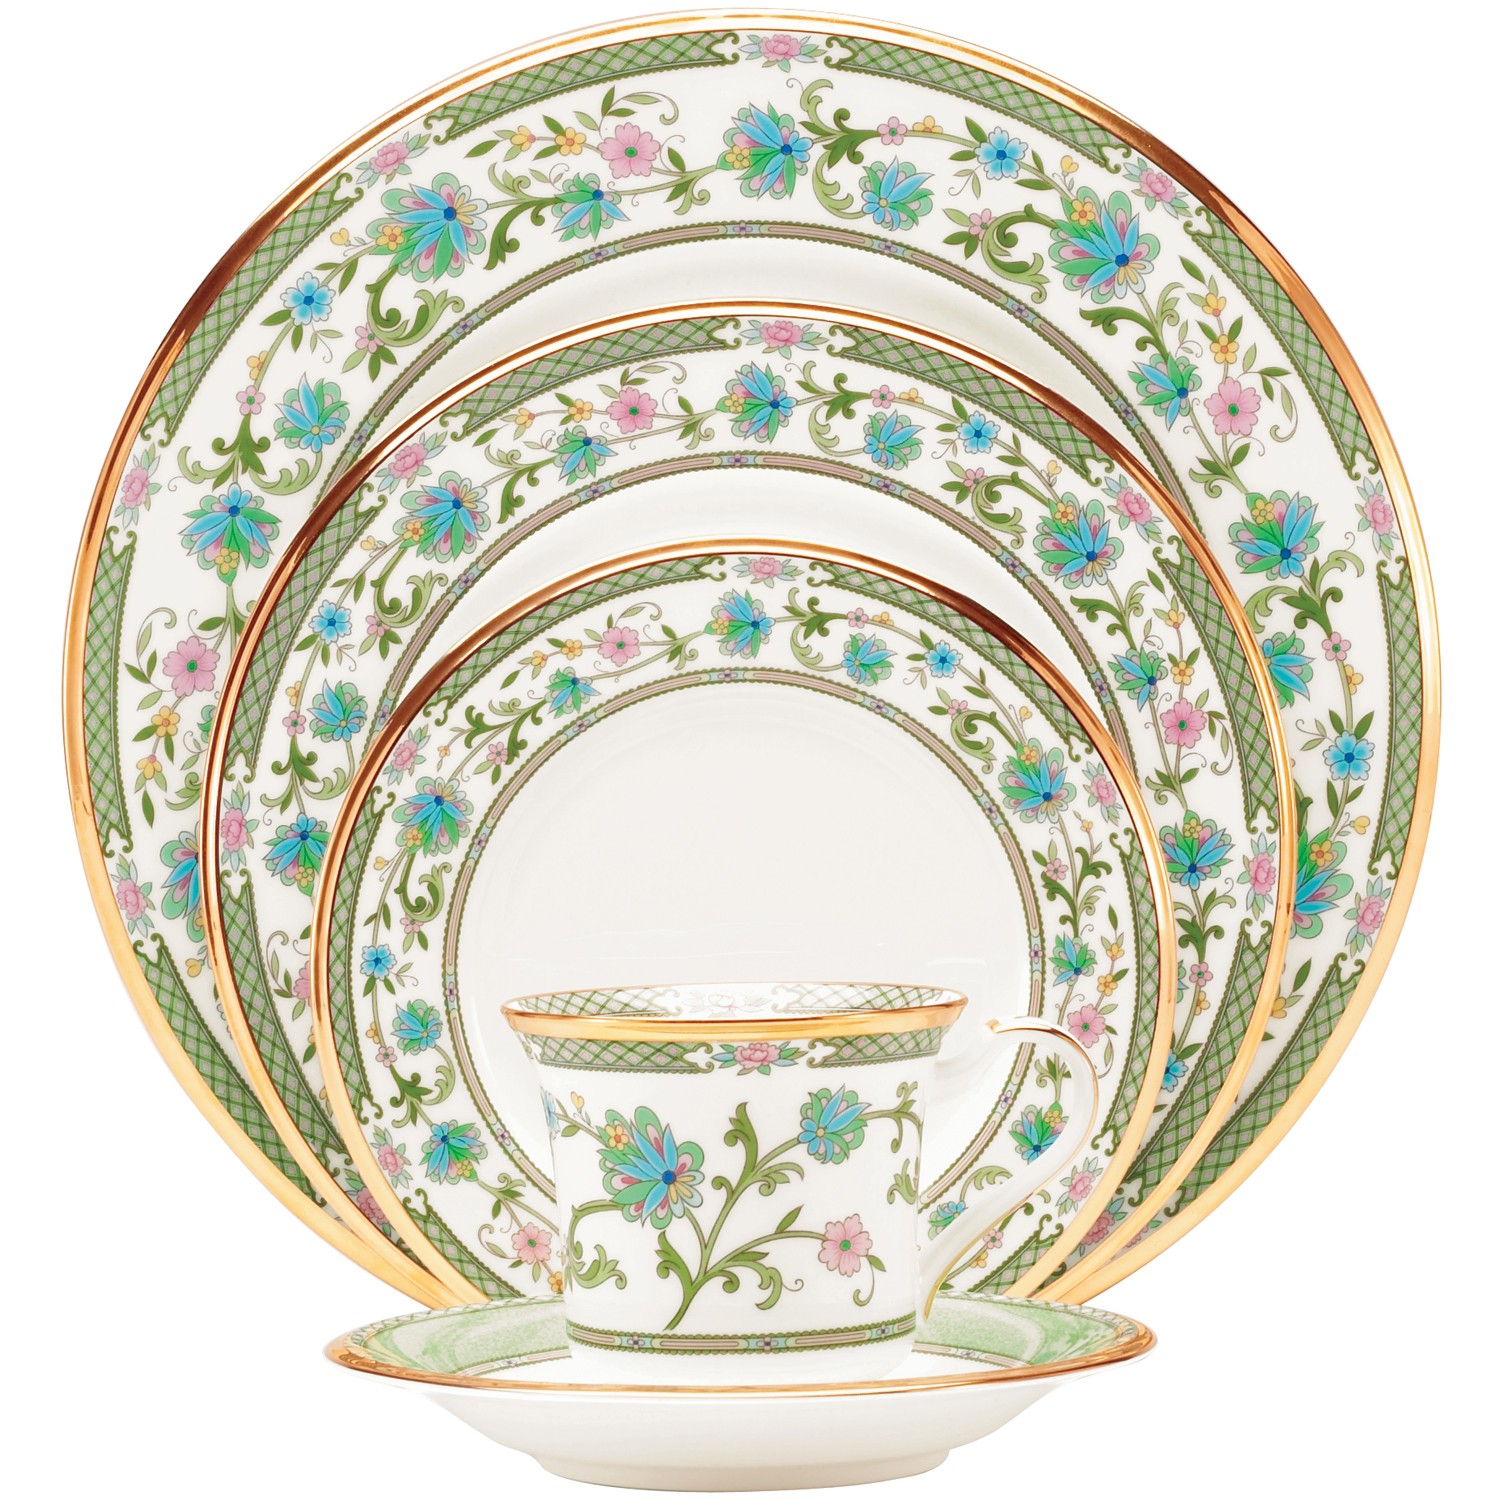 Buy Luxury Dinnerware Sets Online in India at Best Prices - EffnBee  Lifestyle – Story of Creations